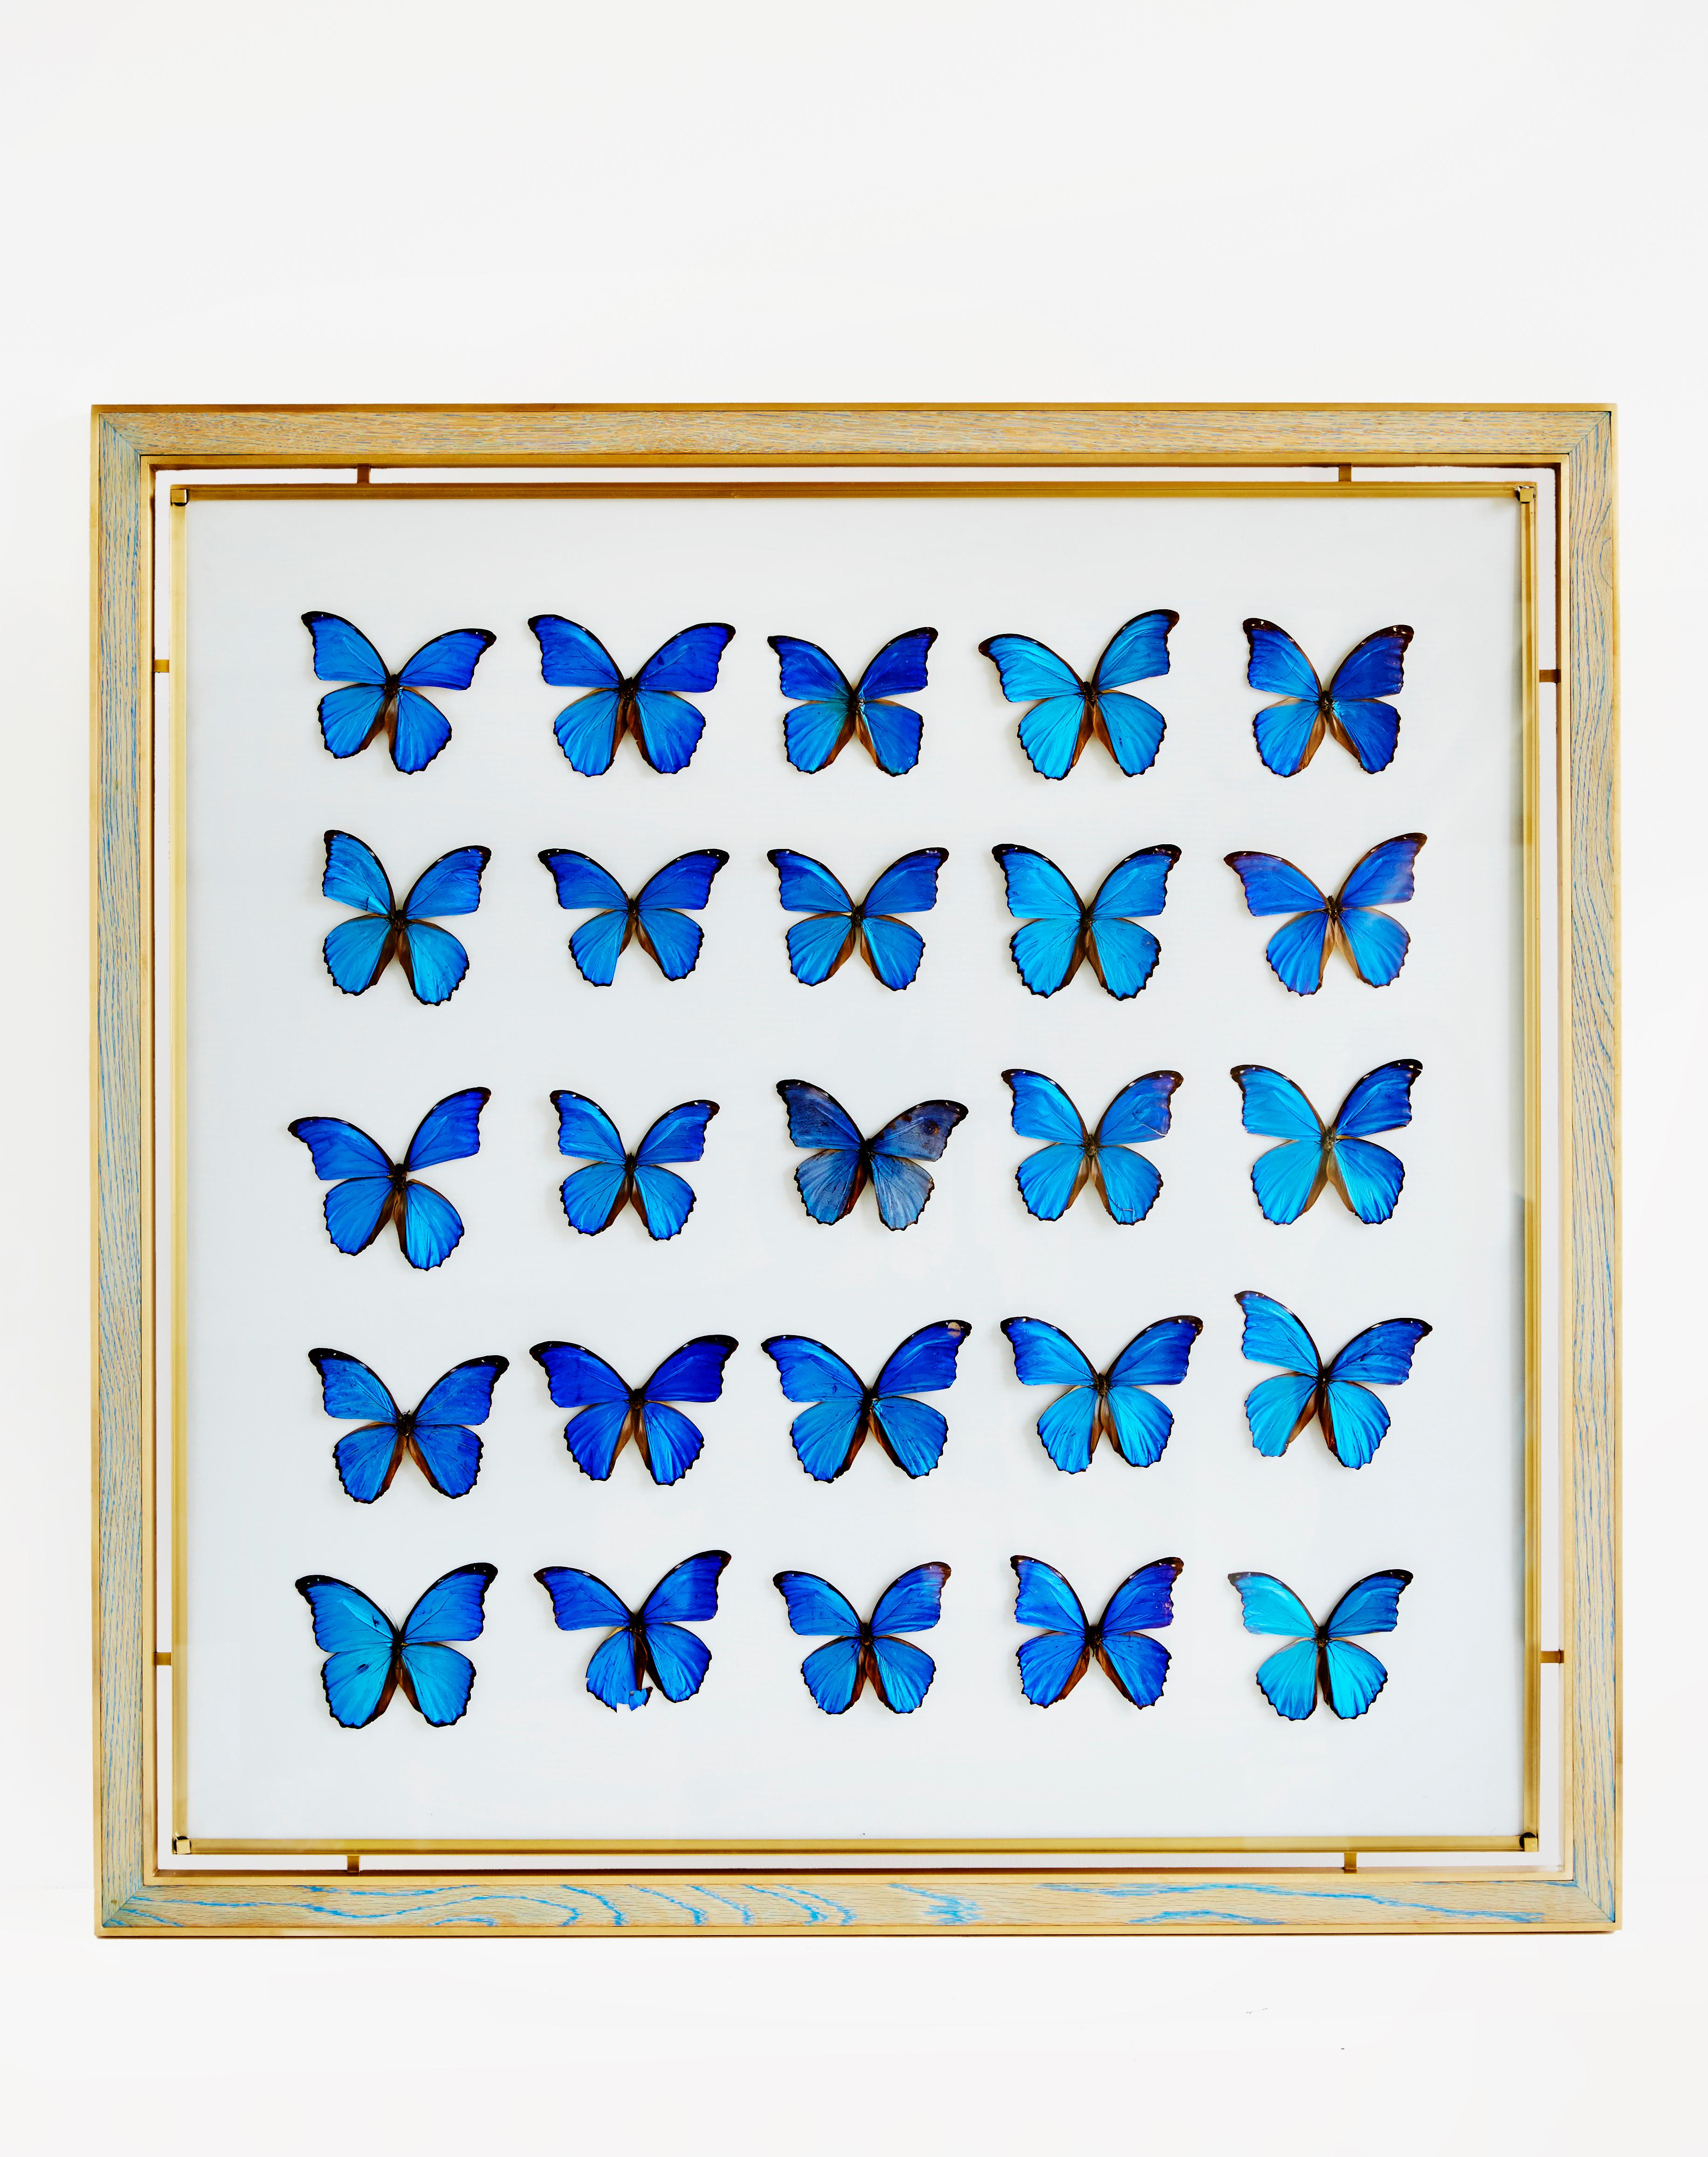 Morpho blue butterfly frame in white oak and brass by Cam Crockford

Additional Information:
Materials: White oak - brass - linen - blue morpho butterfly
Dimensions: 48 W x 1.25 D x 48 H inches.